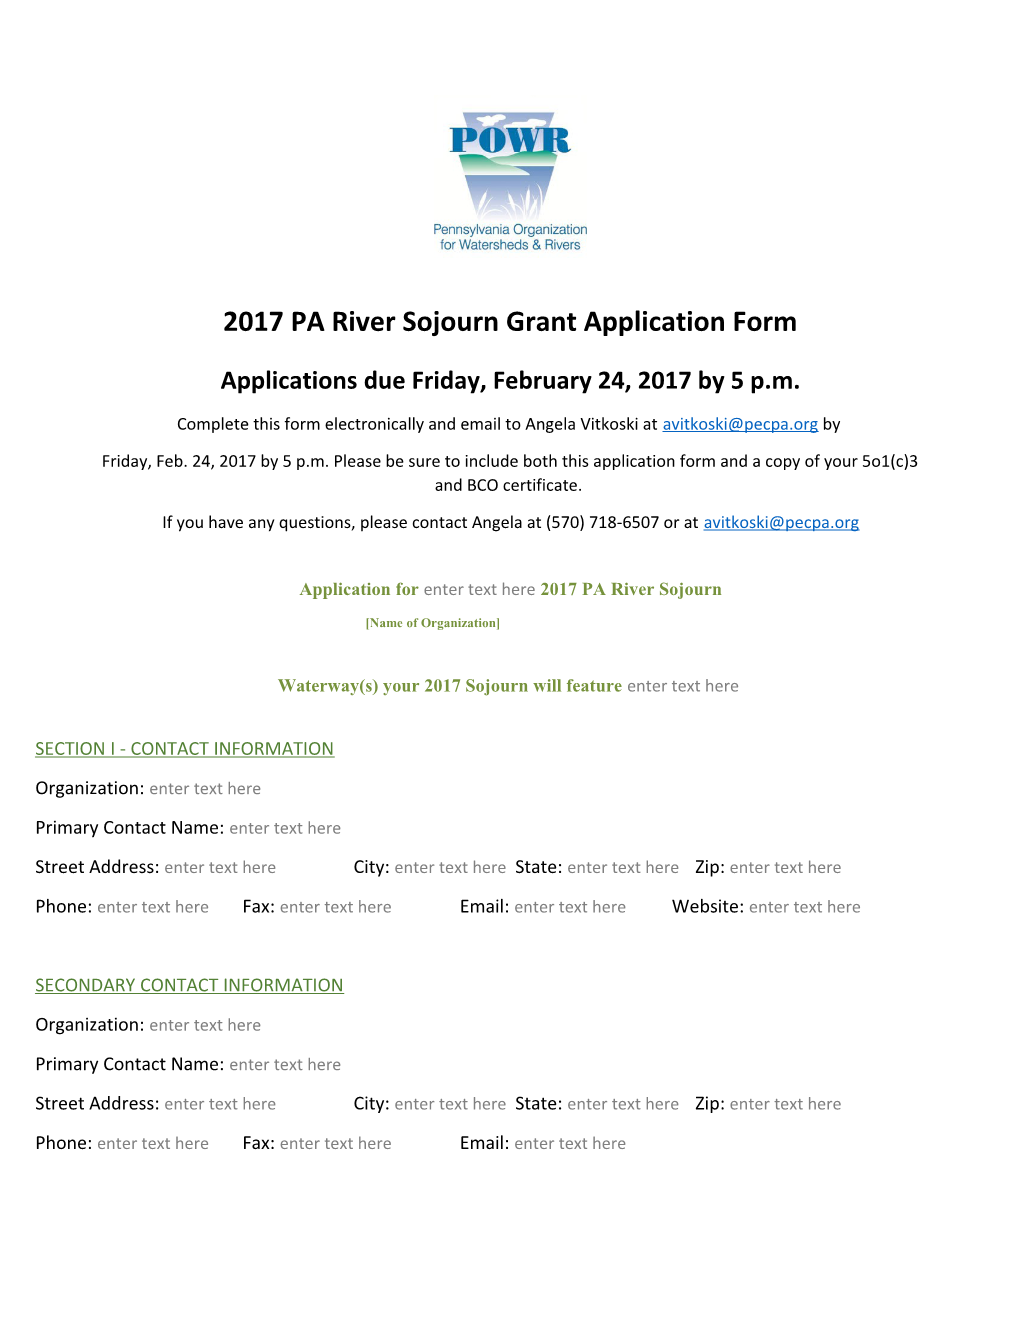 2017PA River Sojourn Grant Application Form